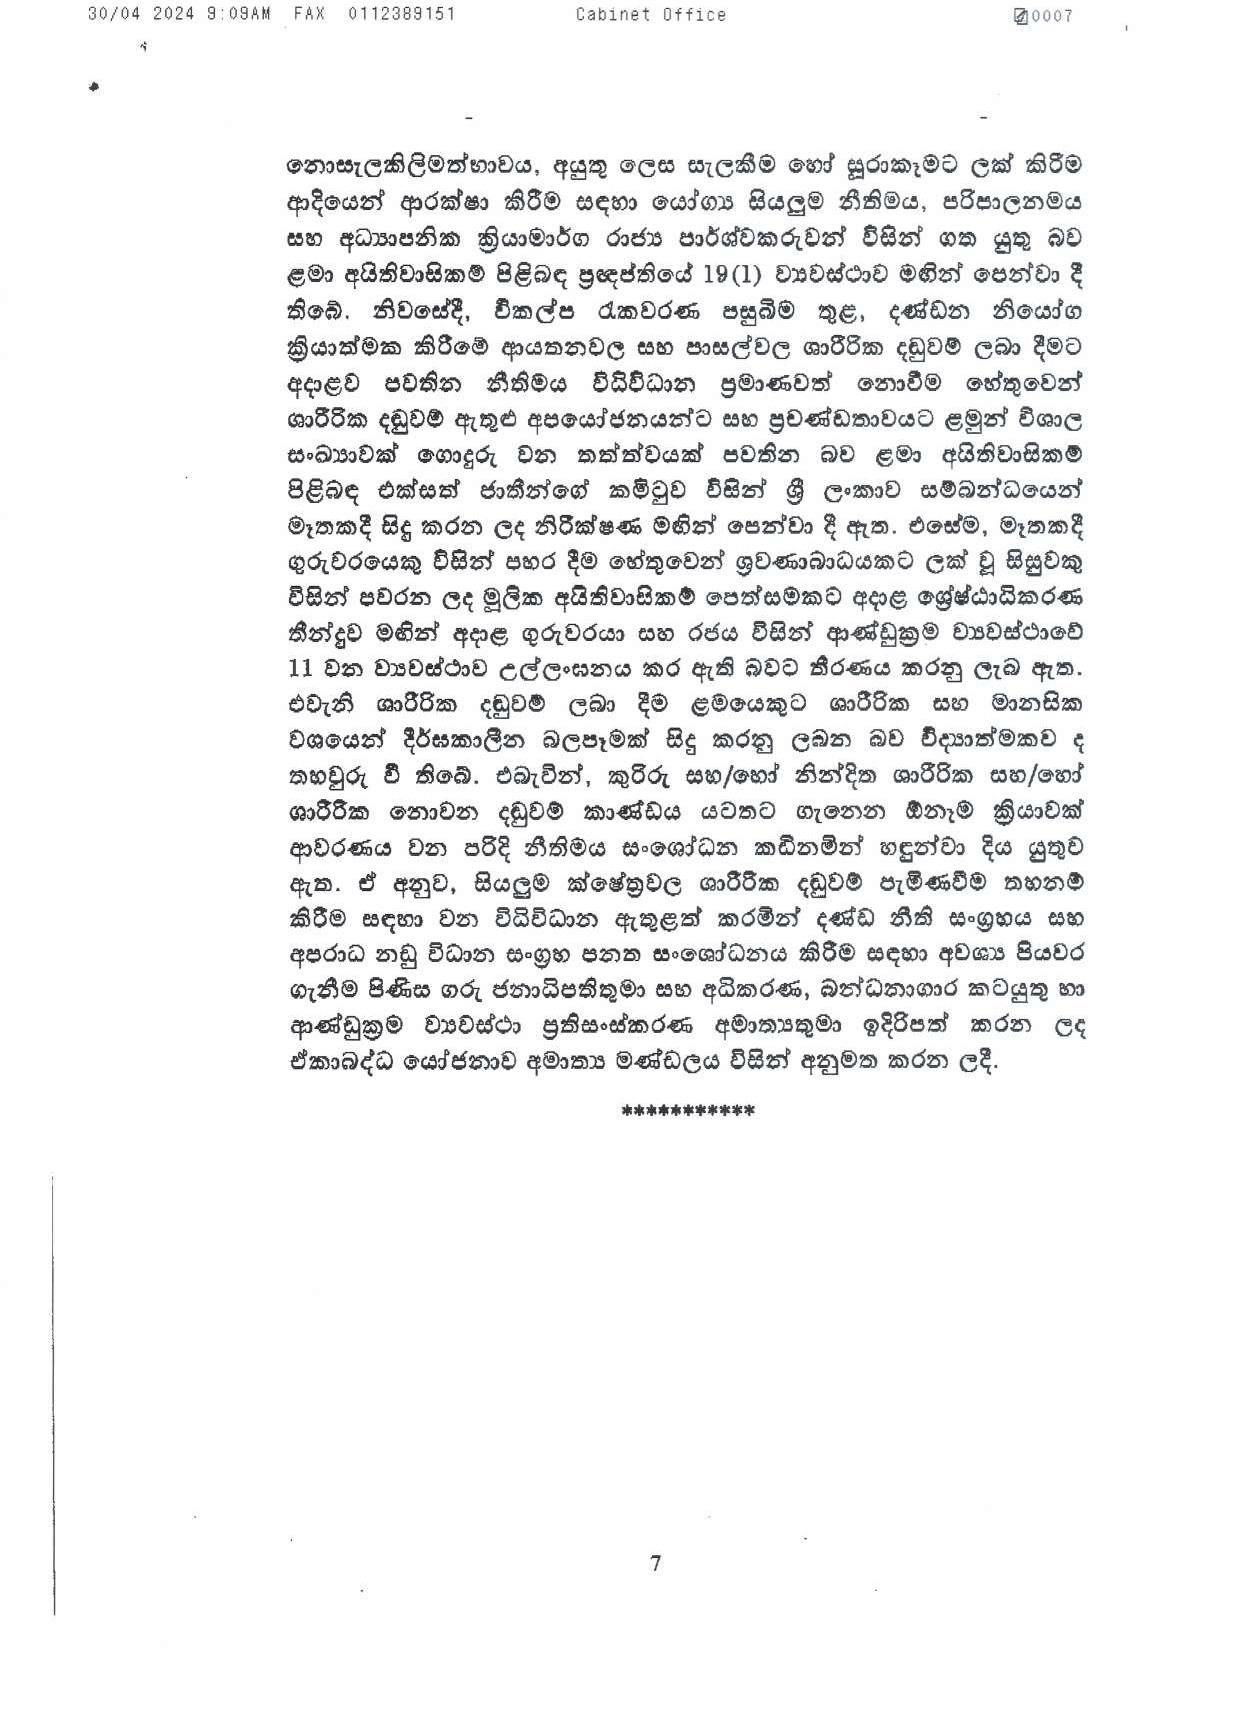 Cabinet Decision on 29.04.2024 page 007